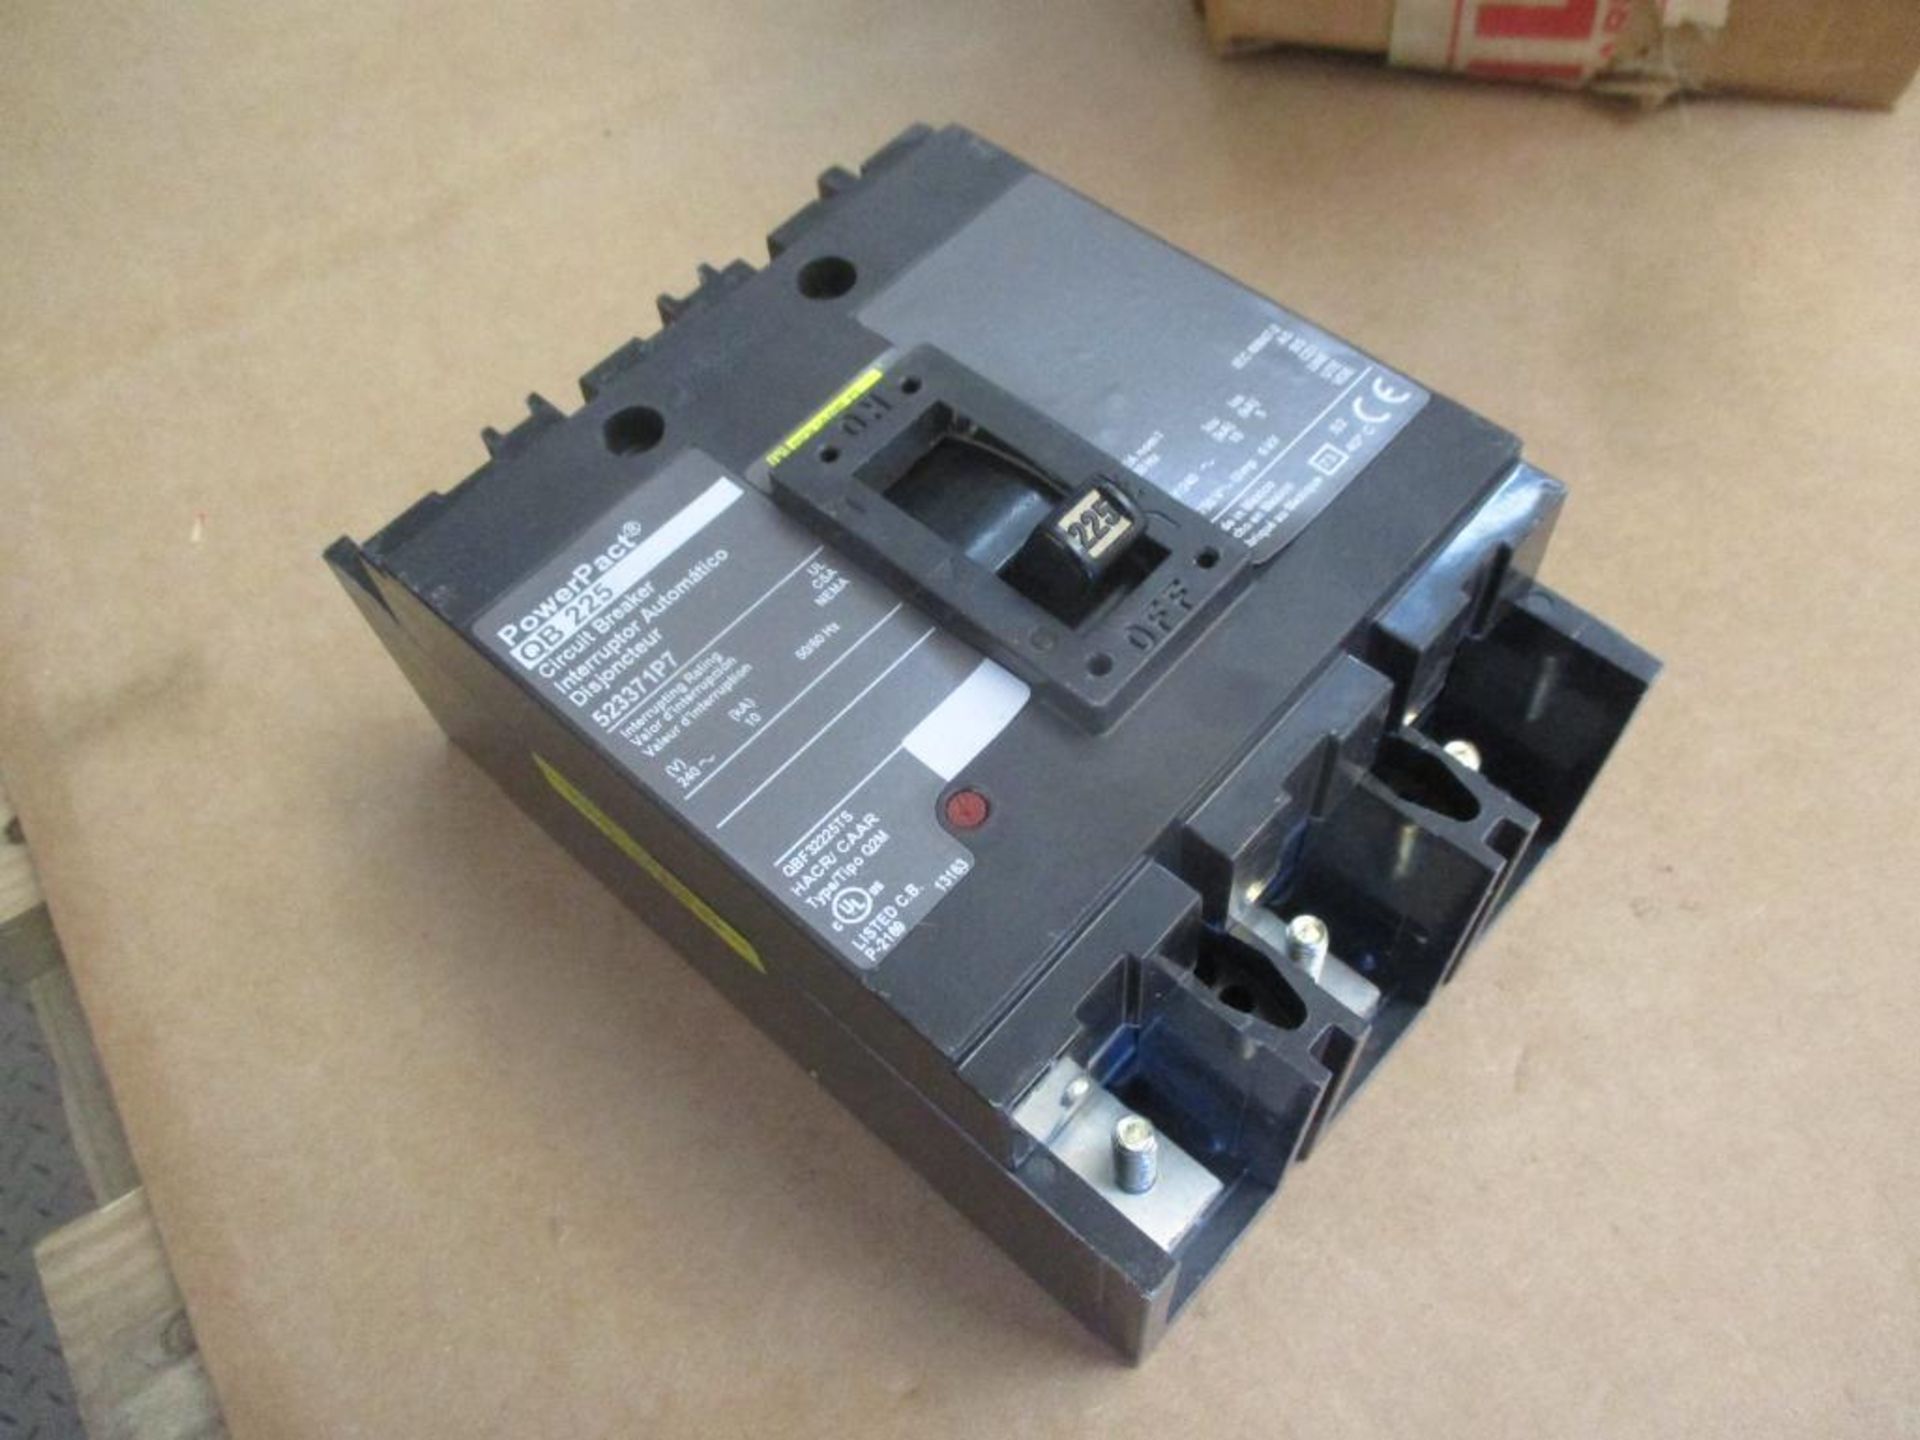 Square D 225 AMP Circuit Breaker, 523371P7, 225A, 3P, 240VAC, PowerPacT QB225 (New in Box) - Image 2 of 4